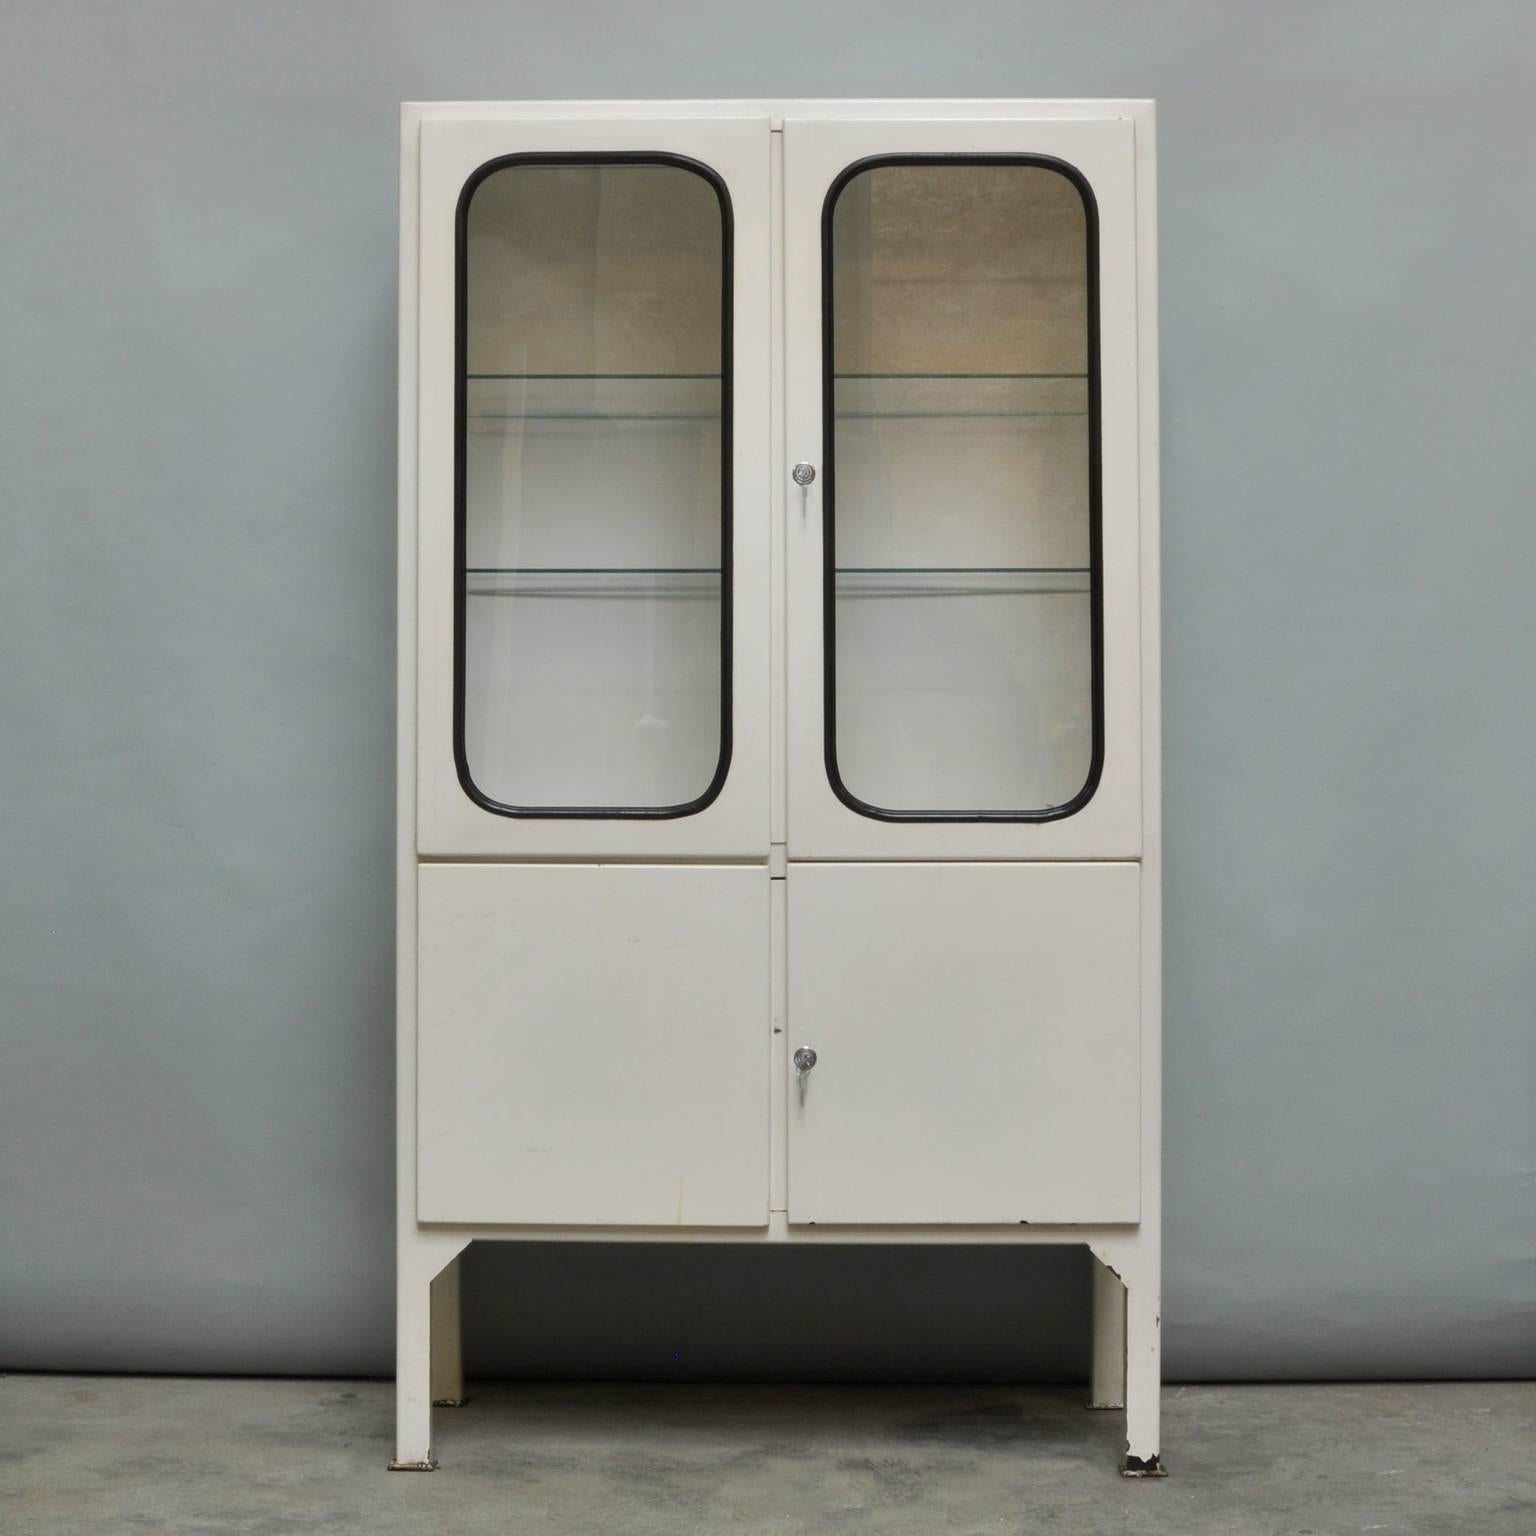 This medicine cabinet was designed in the 1970s and was produced, circa 1975 in Hungary. It is made from iron and antique glass, and the glass is held by a black rubber strip. The cabinet features two new adjustable glass shelves and functioning